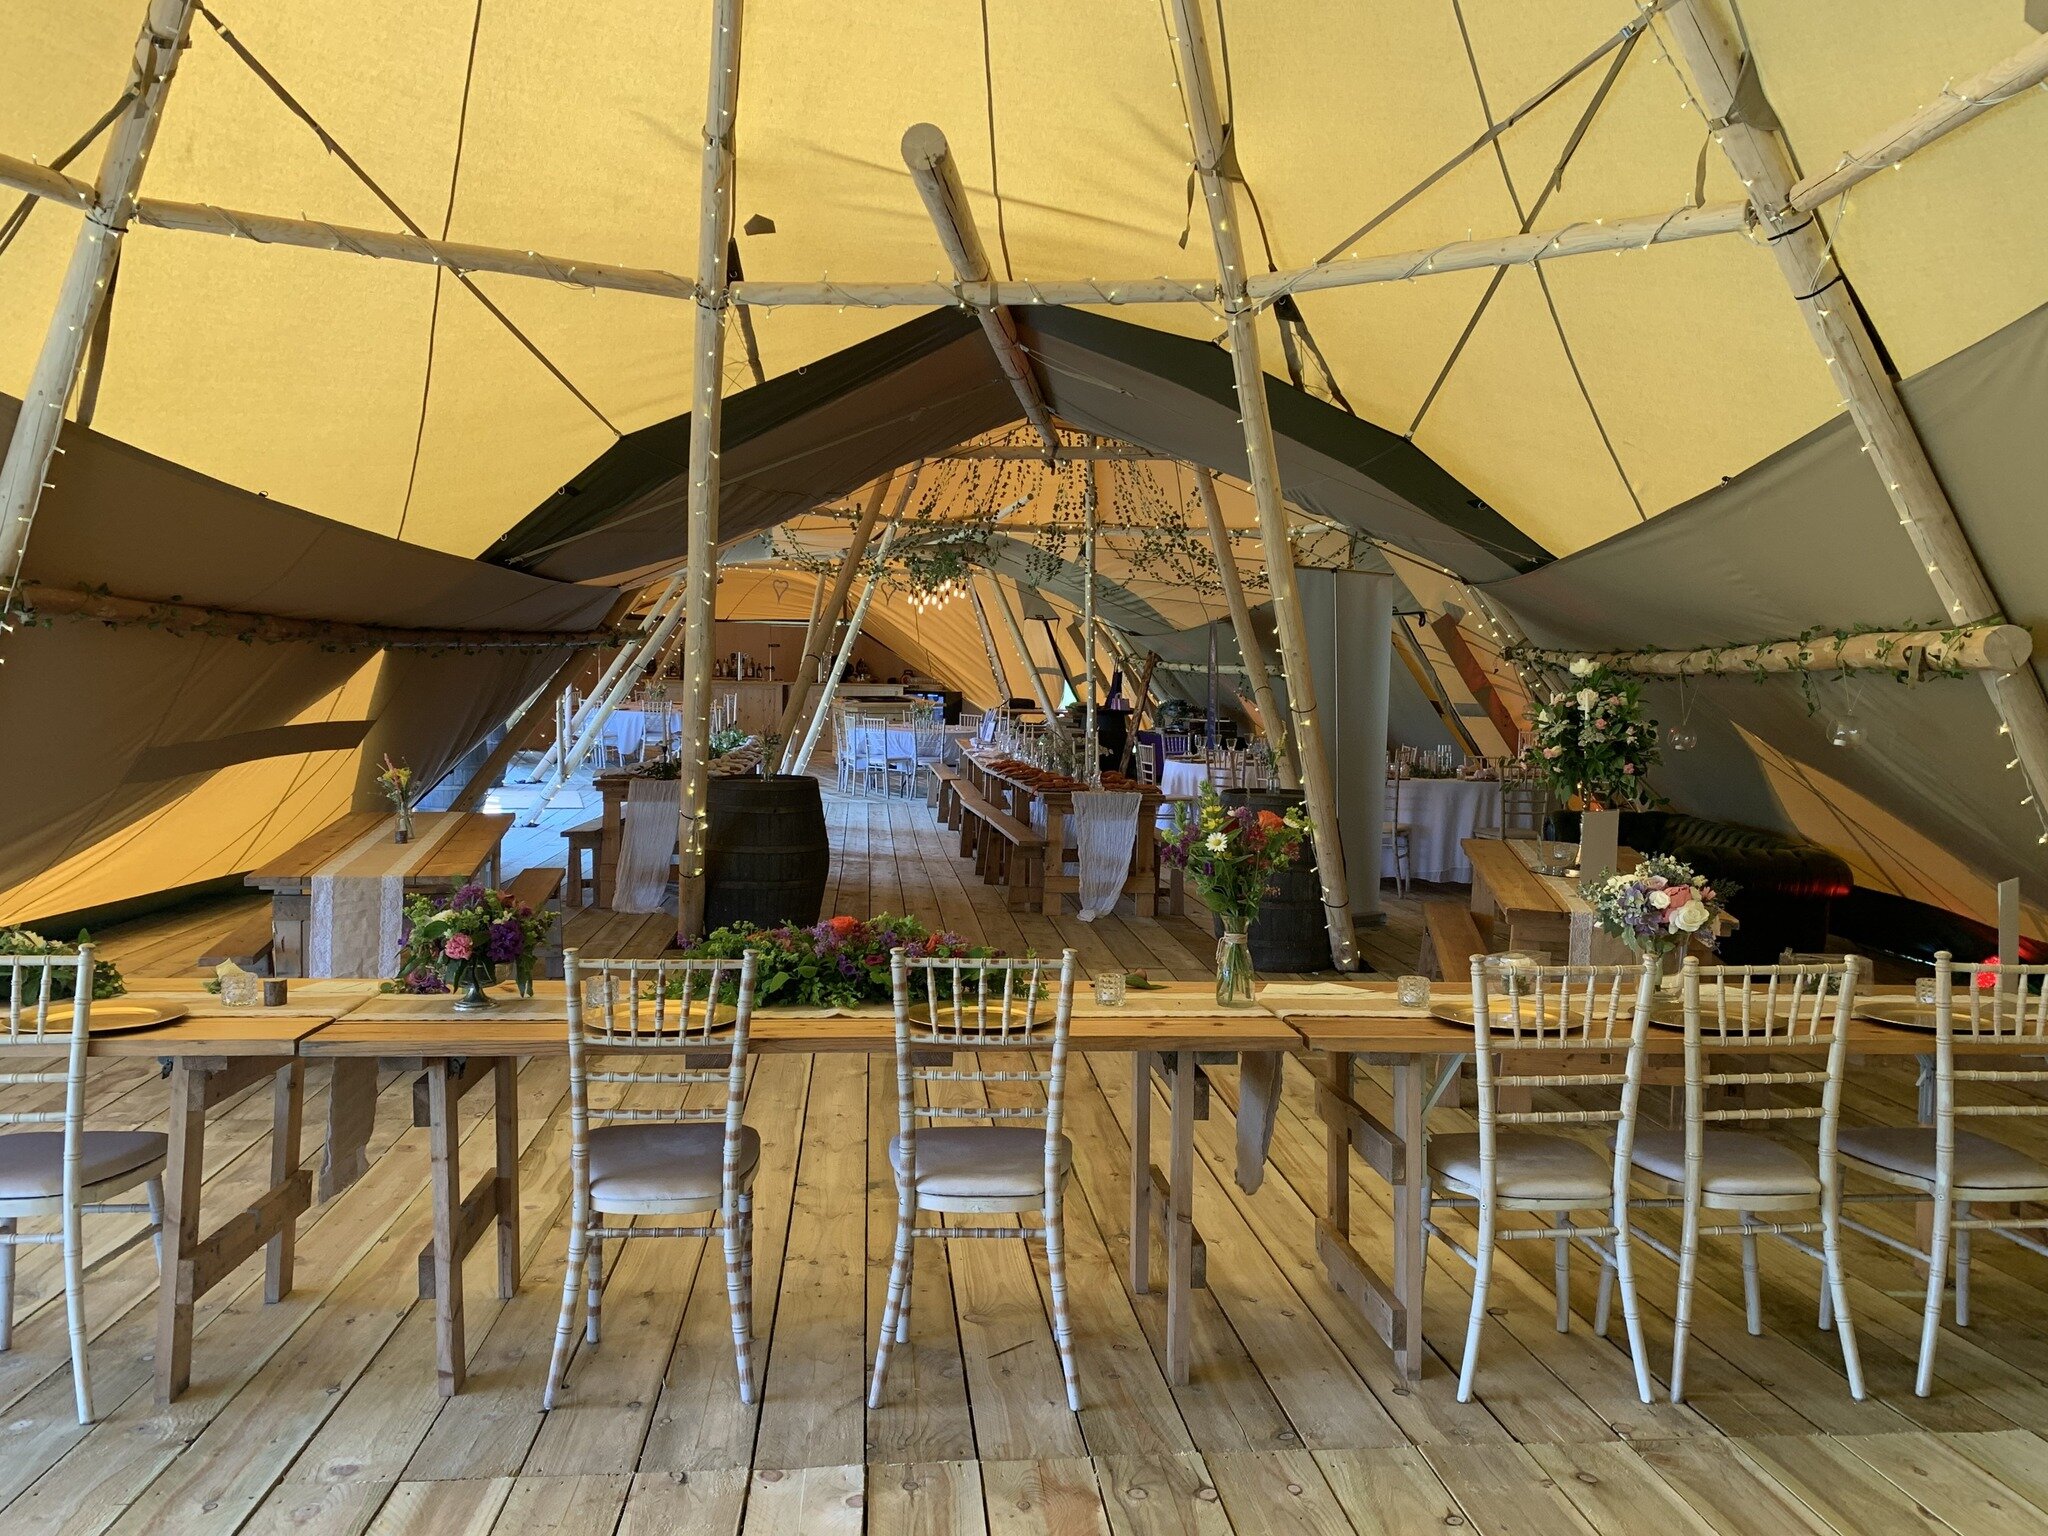 Wondering how many people can you have at your wedding?
Our Tipis can seat up to 150 guests.

Want to come and see the Tipis in person?
We will be announcing our open day very soon. Watch this space!

#tipis #tipiwedding #tipiweddingvenue #shropshire